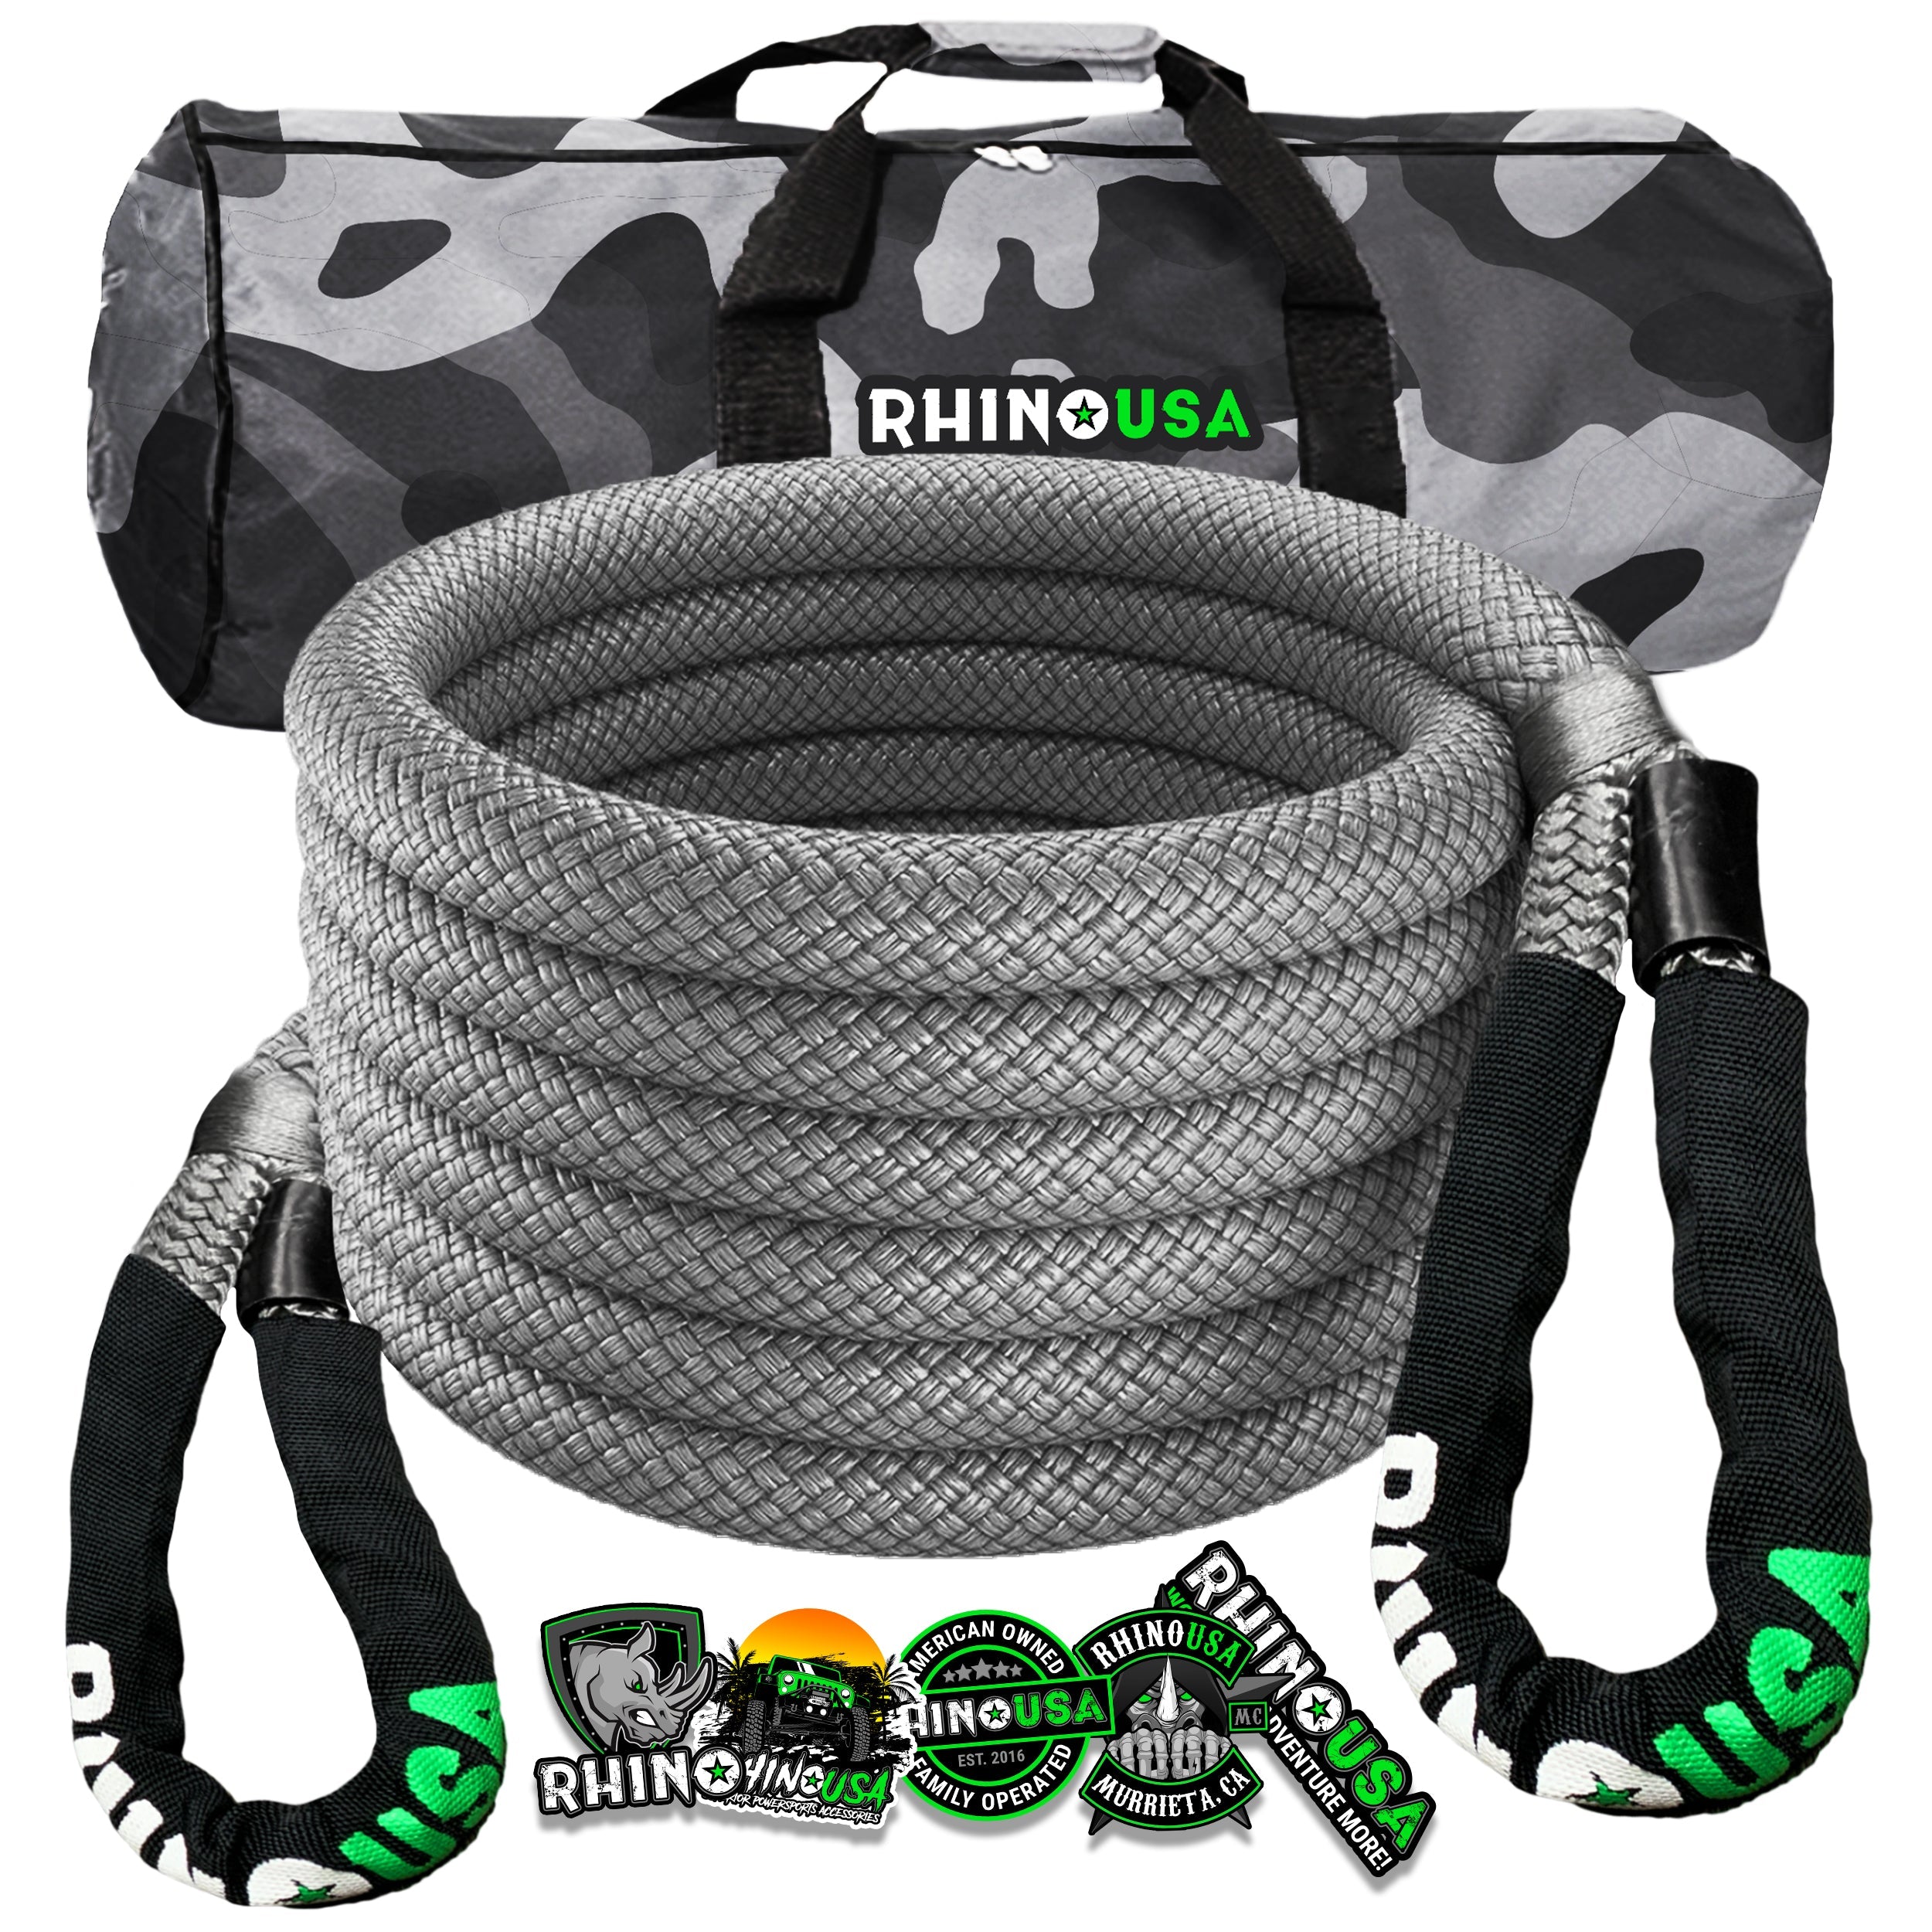 1-1/4 Ultimate Kinetic Recovery Rope (52,300 lb MTS, 17,434 lb